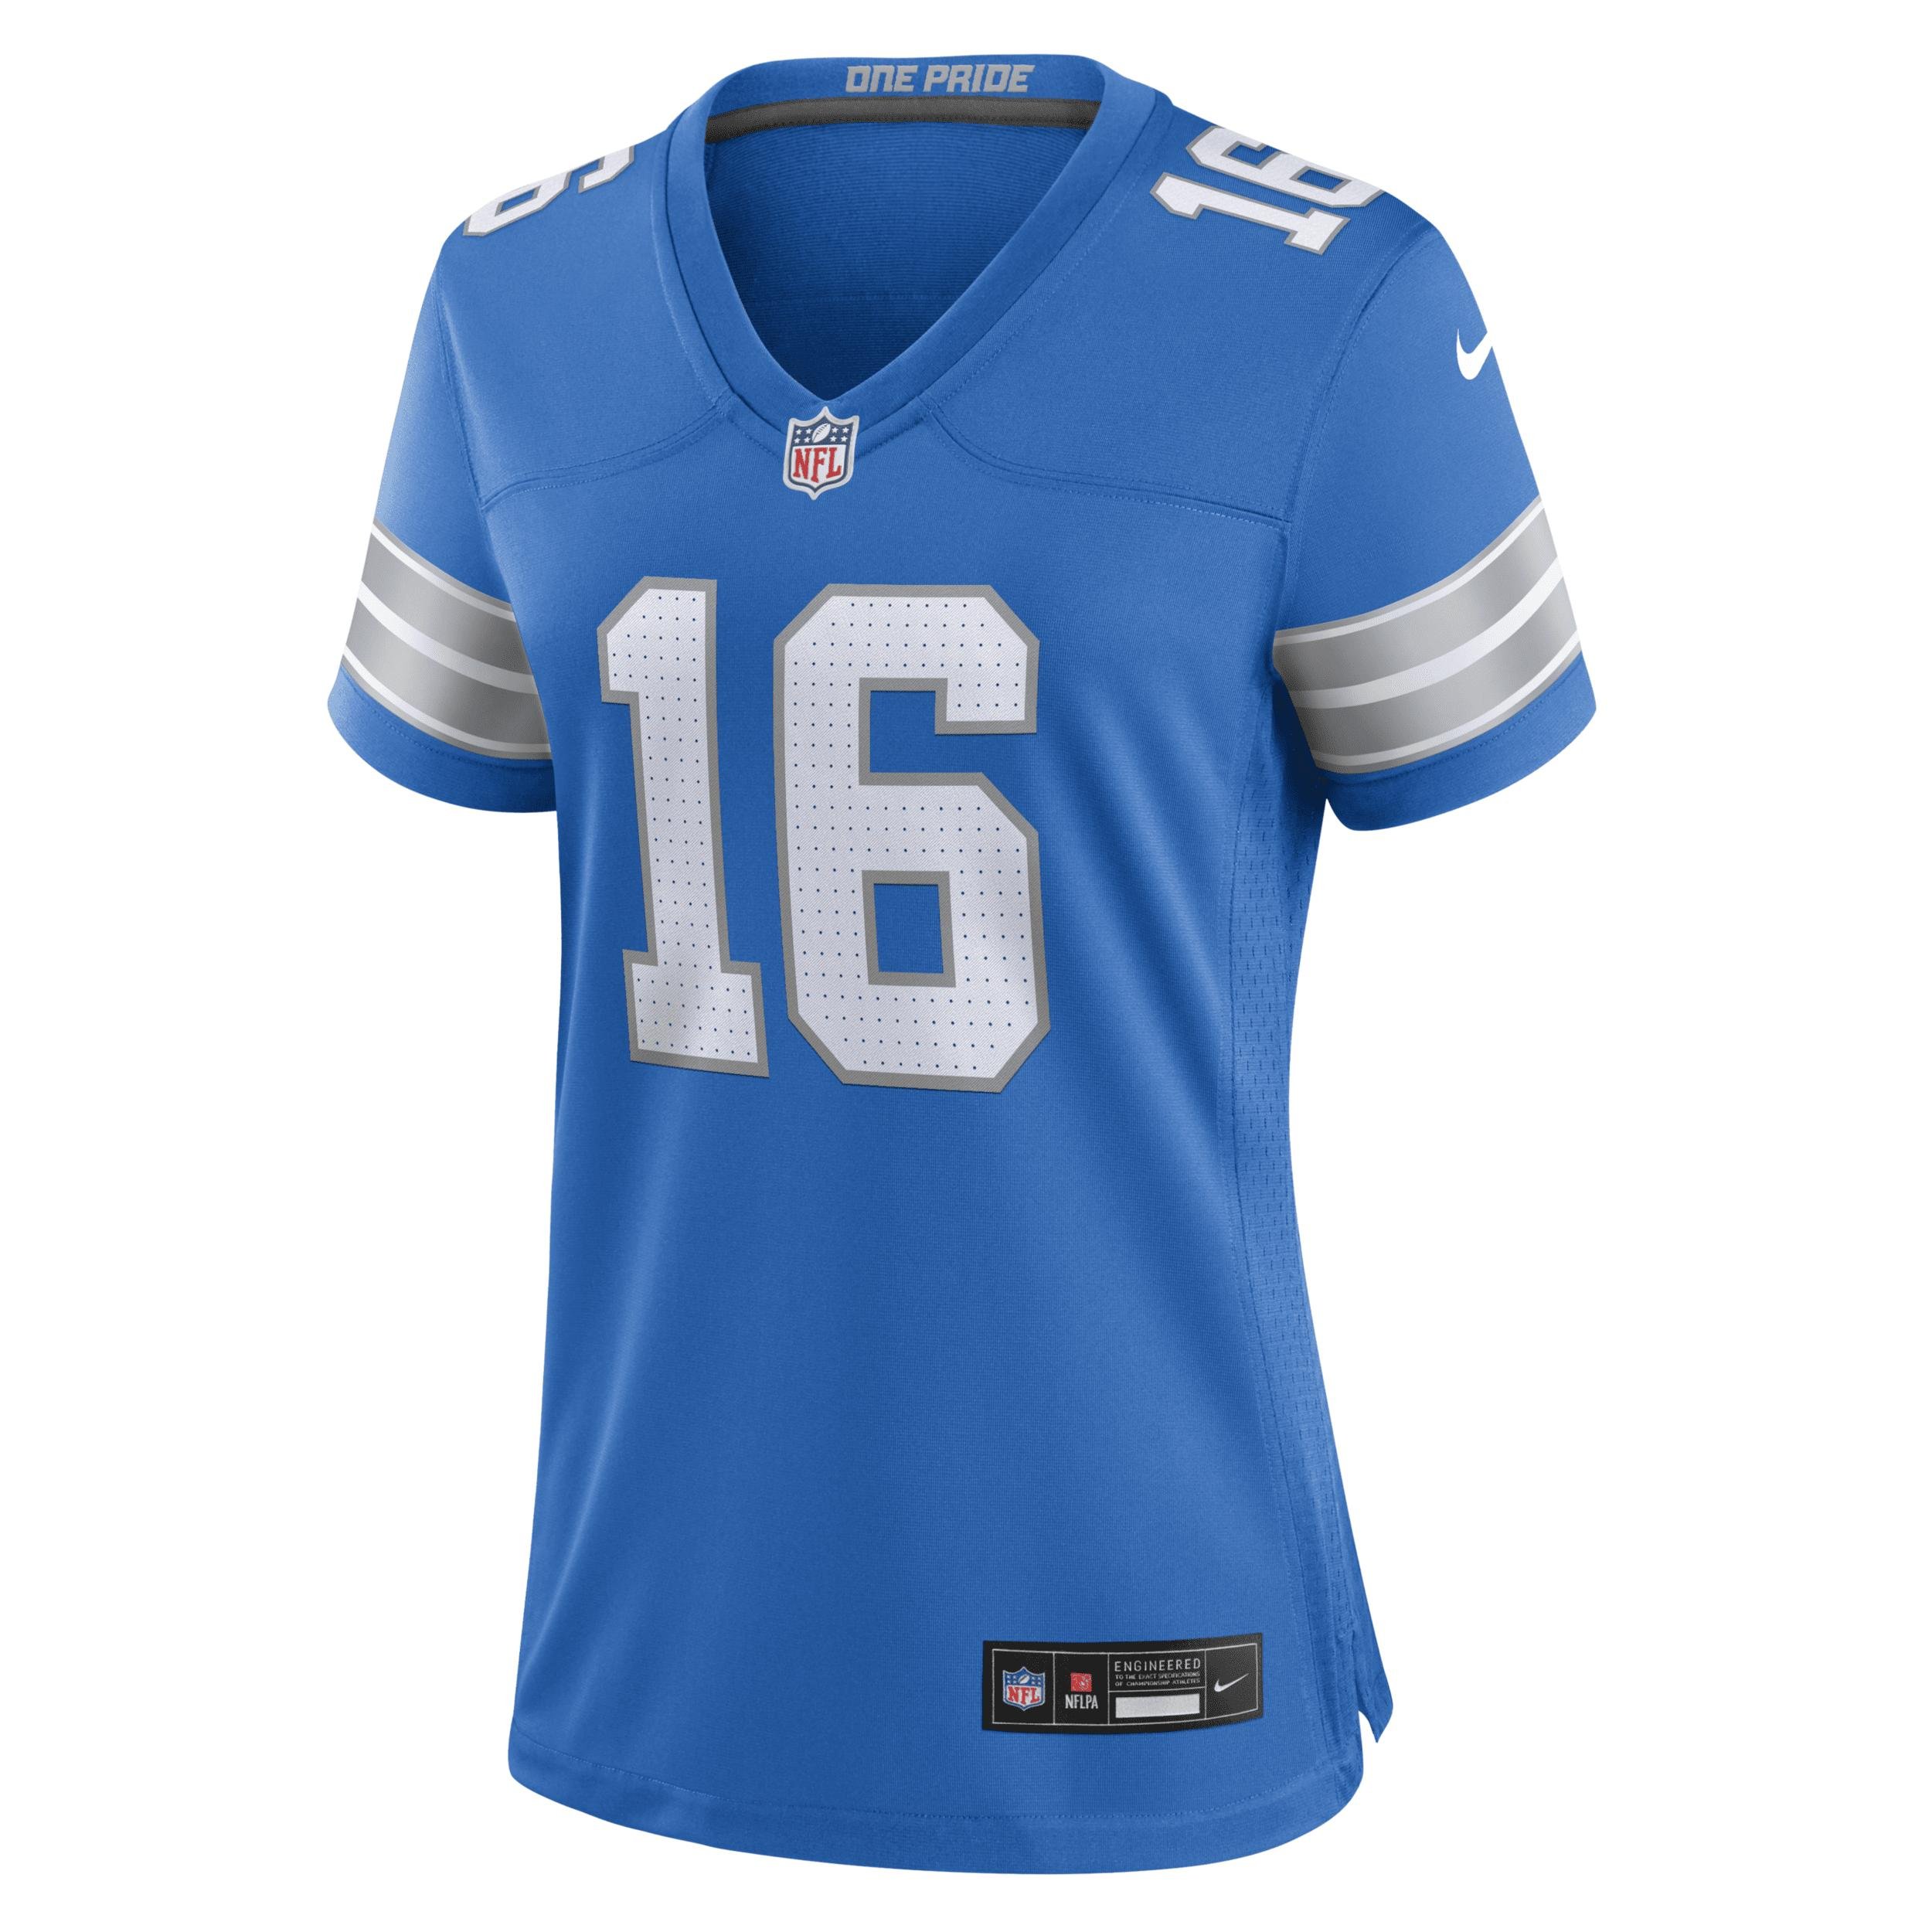 Jared Goff Detroit Lions Nike Women's NFL Game Football Jersey by NIKE